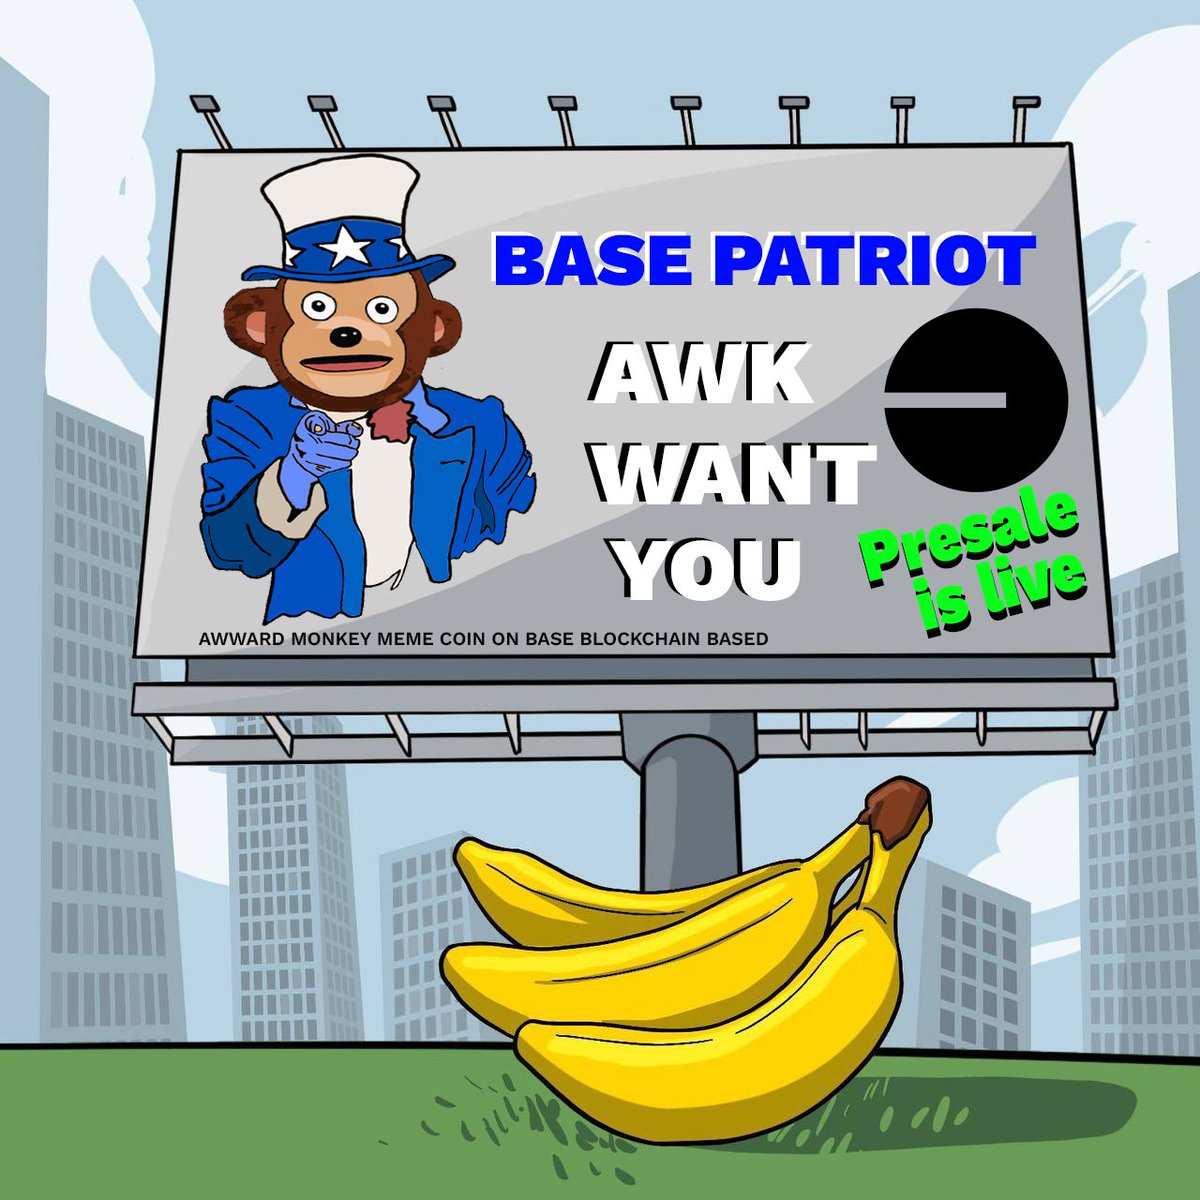 ☝️ ARE YOU A PATRIOT ☝️ ARE YOU BASED 👉 WE WANT YOU 🙈 JOIN US TODAY AWKWARDMONKEY BASED MEME COIN IS AWAITING FOR YOU PARTICIPATE PRESALE 🍌 send 0.005 ETH on ETH or BASE to 0x05f6ae0cba9fcc63bb8c7c7c7d7f0bd2eaa54778